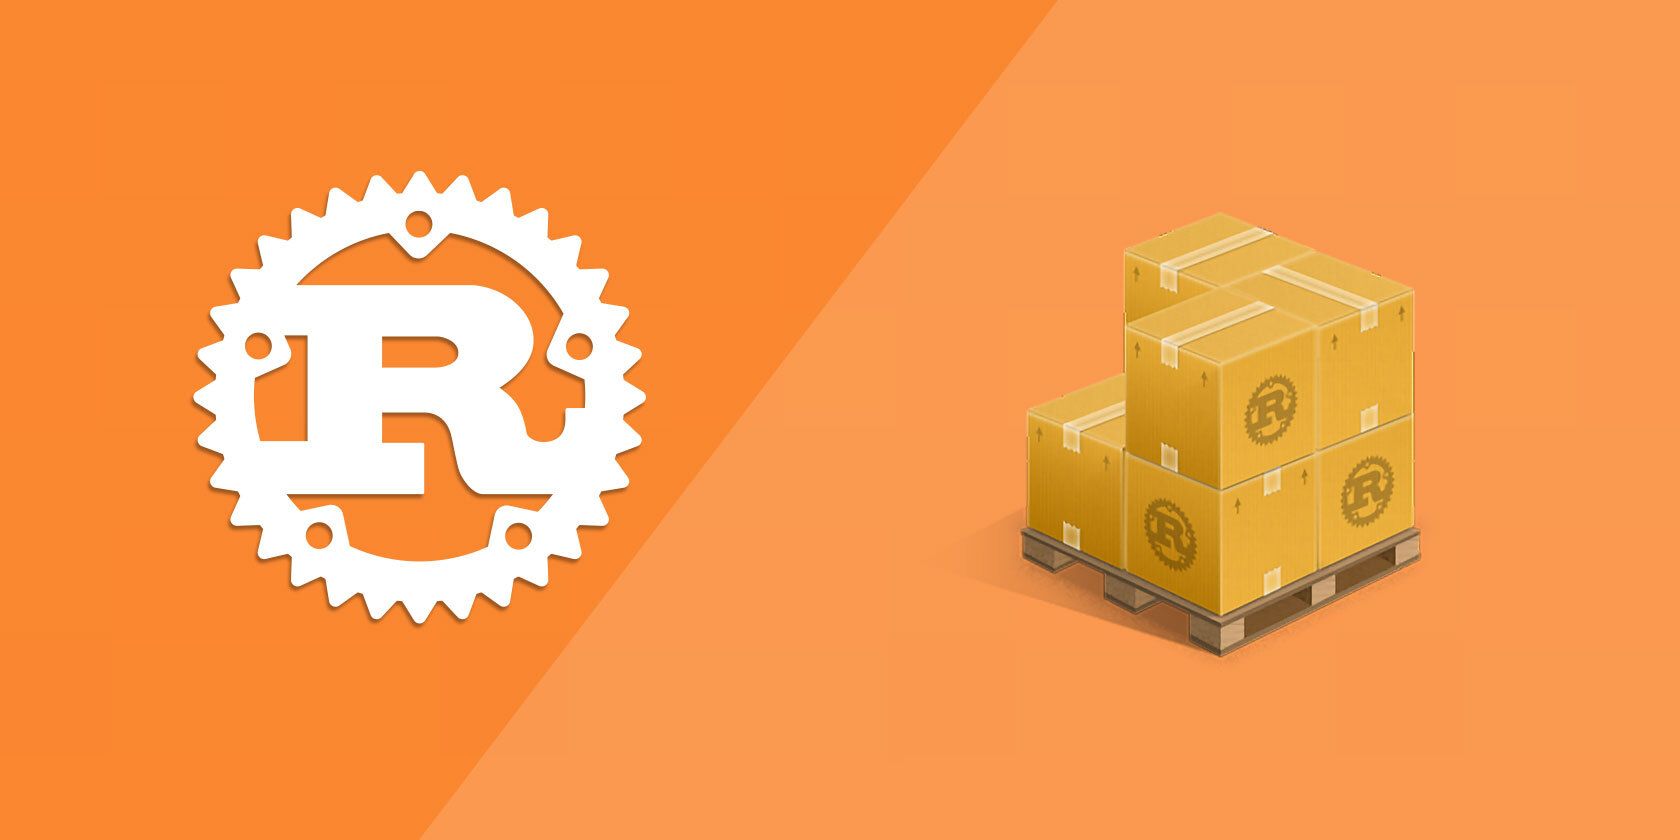 The Rust logo alongside an illustration of a stack of crates bearing the same logo